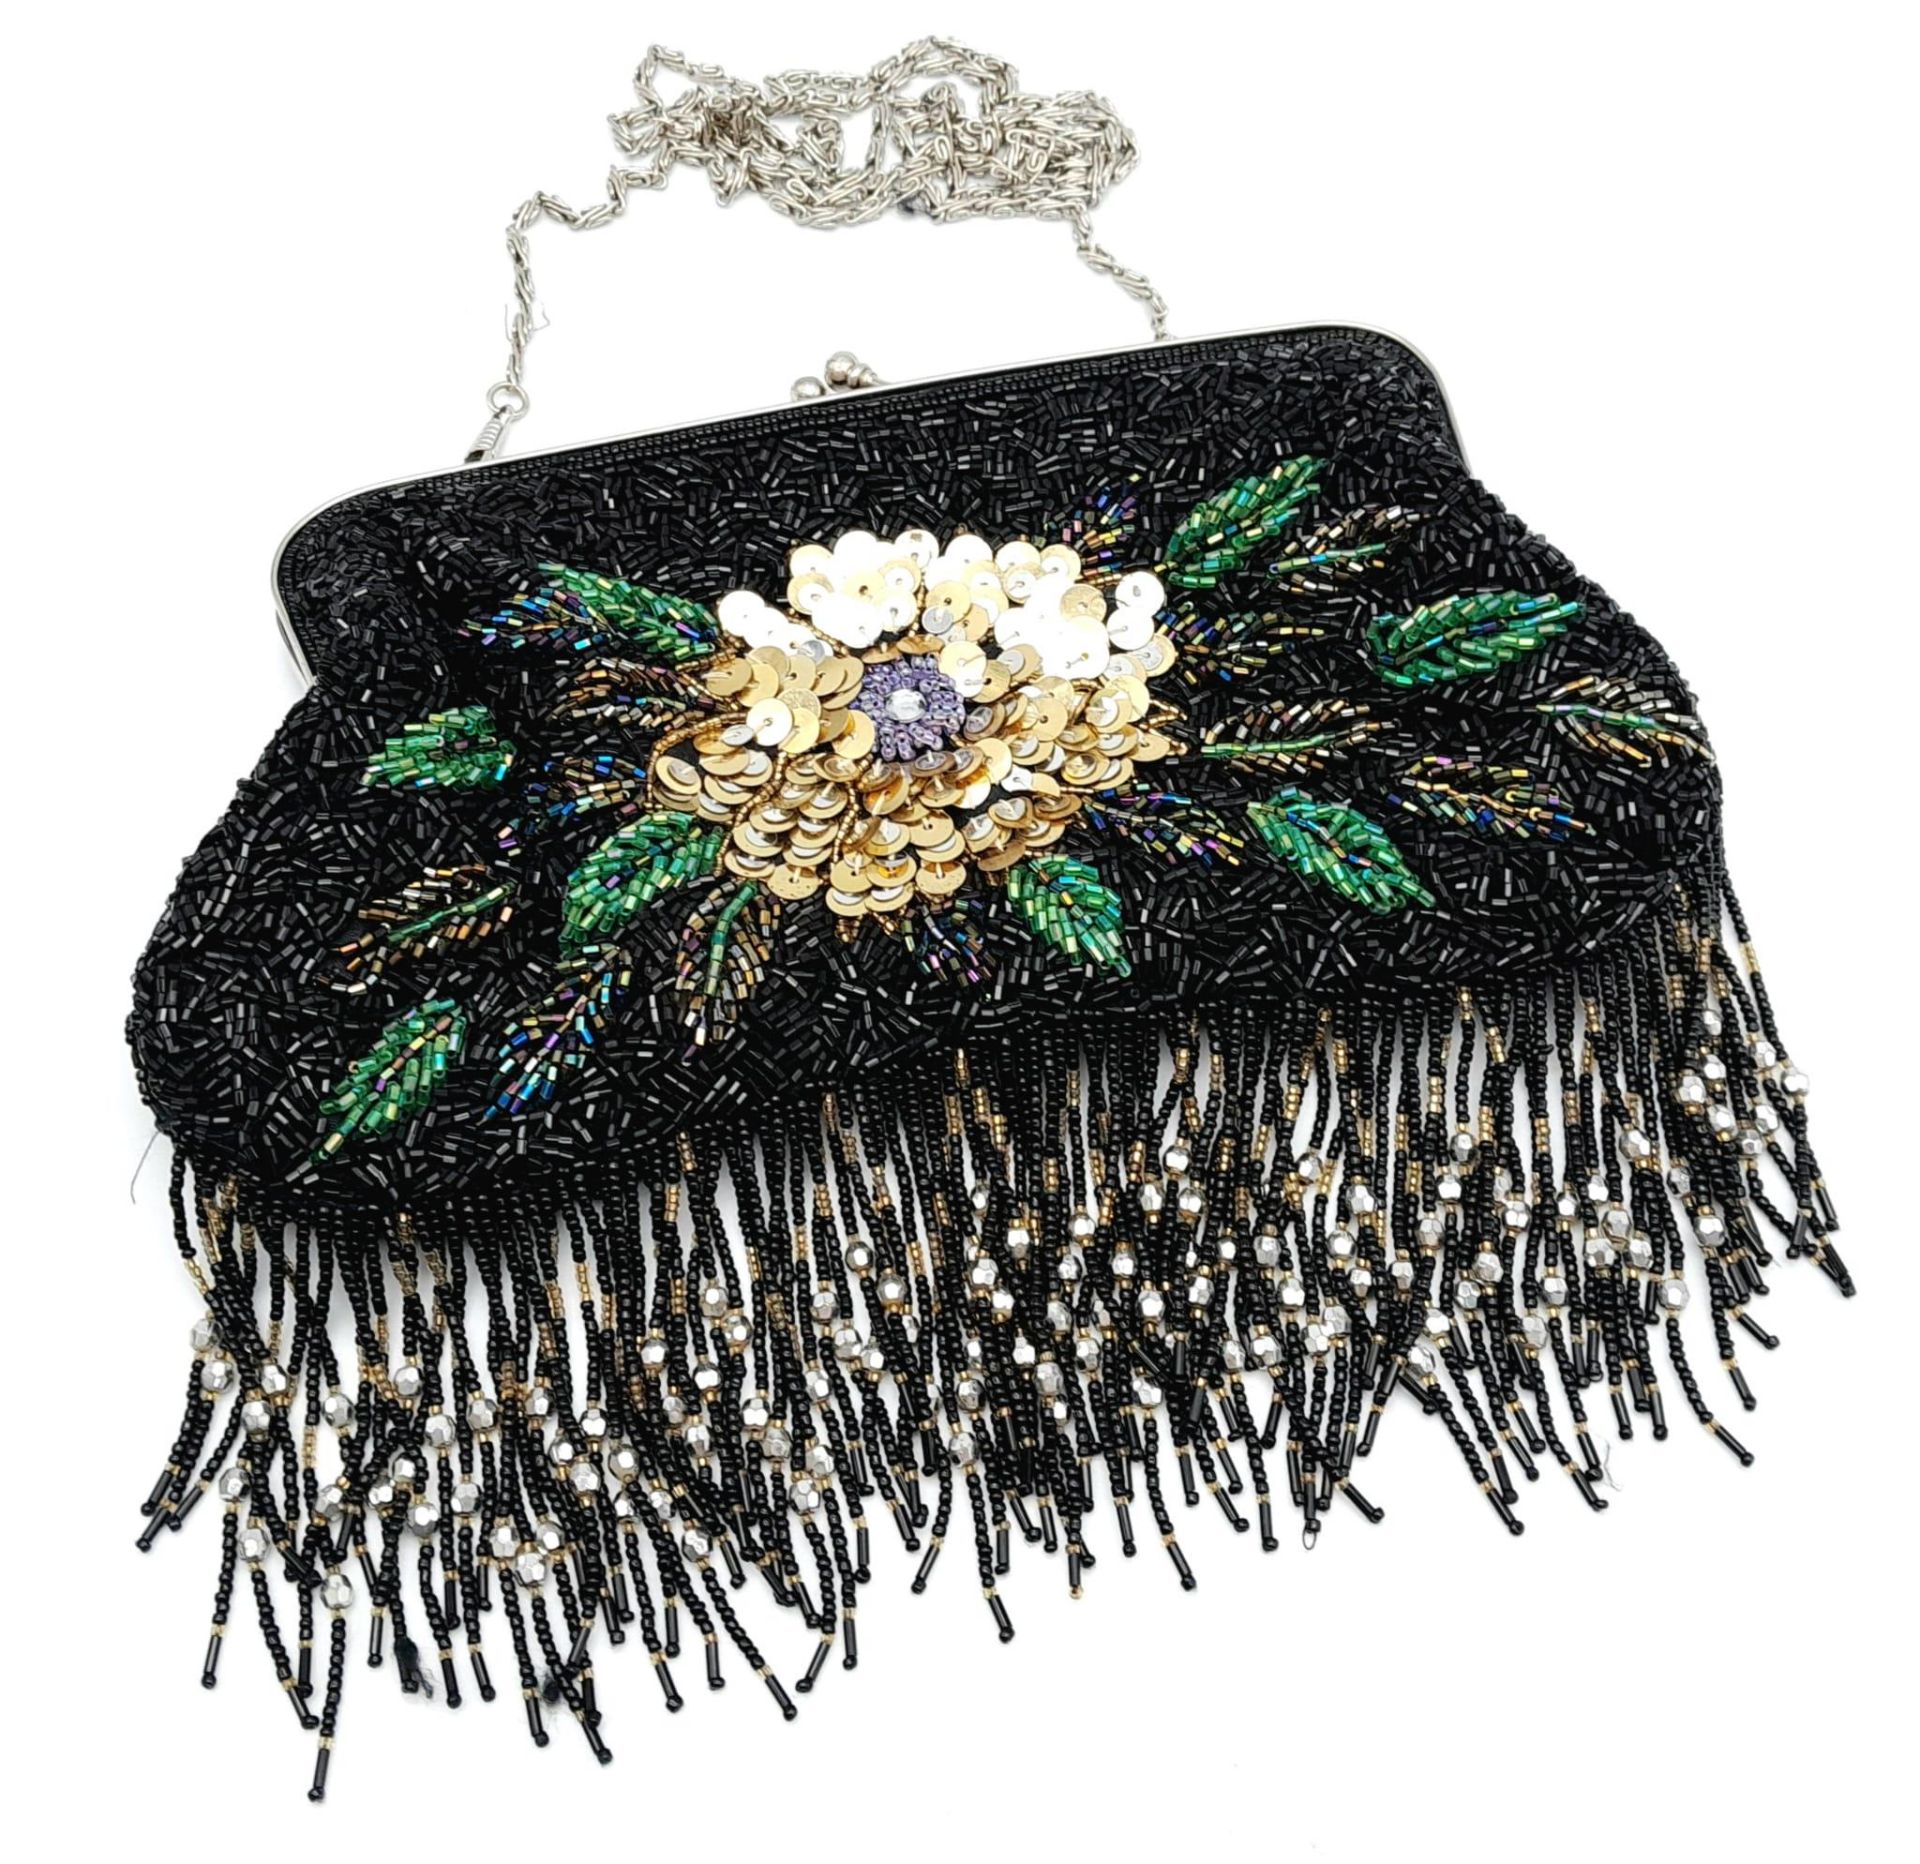 A Fashionable Floral Beaded Bag. Sequins and tassels decoration. Silver tone shoulder chain. 23cm